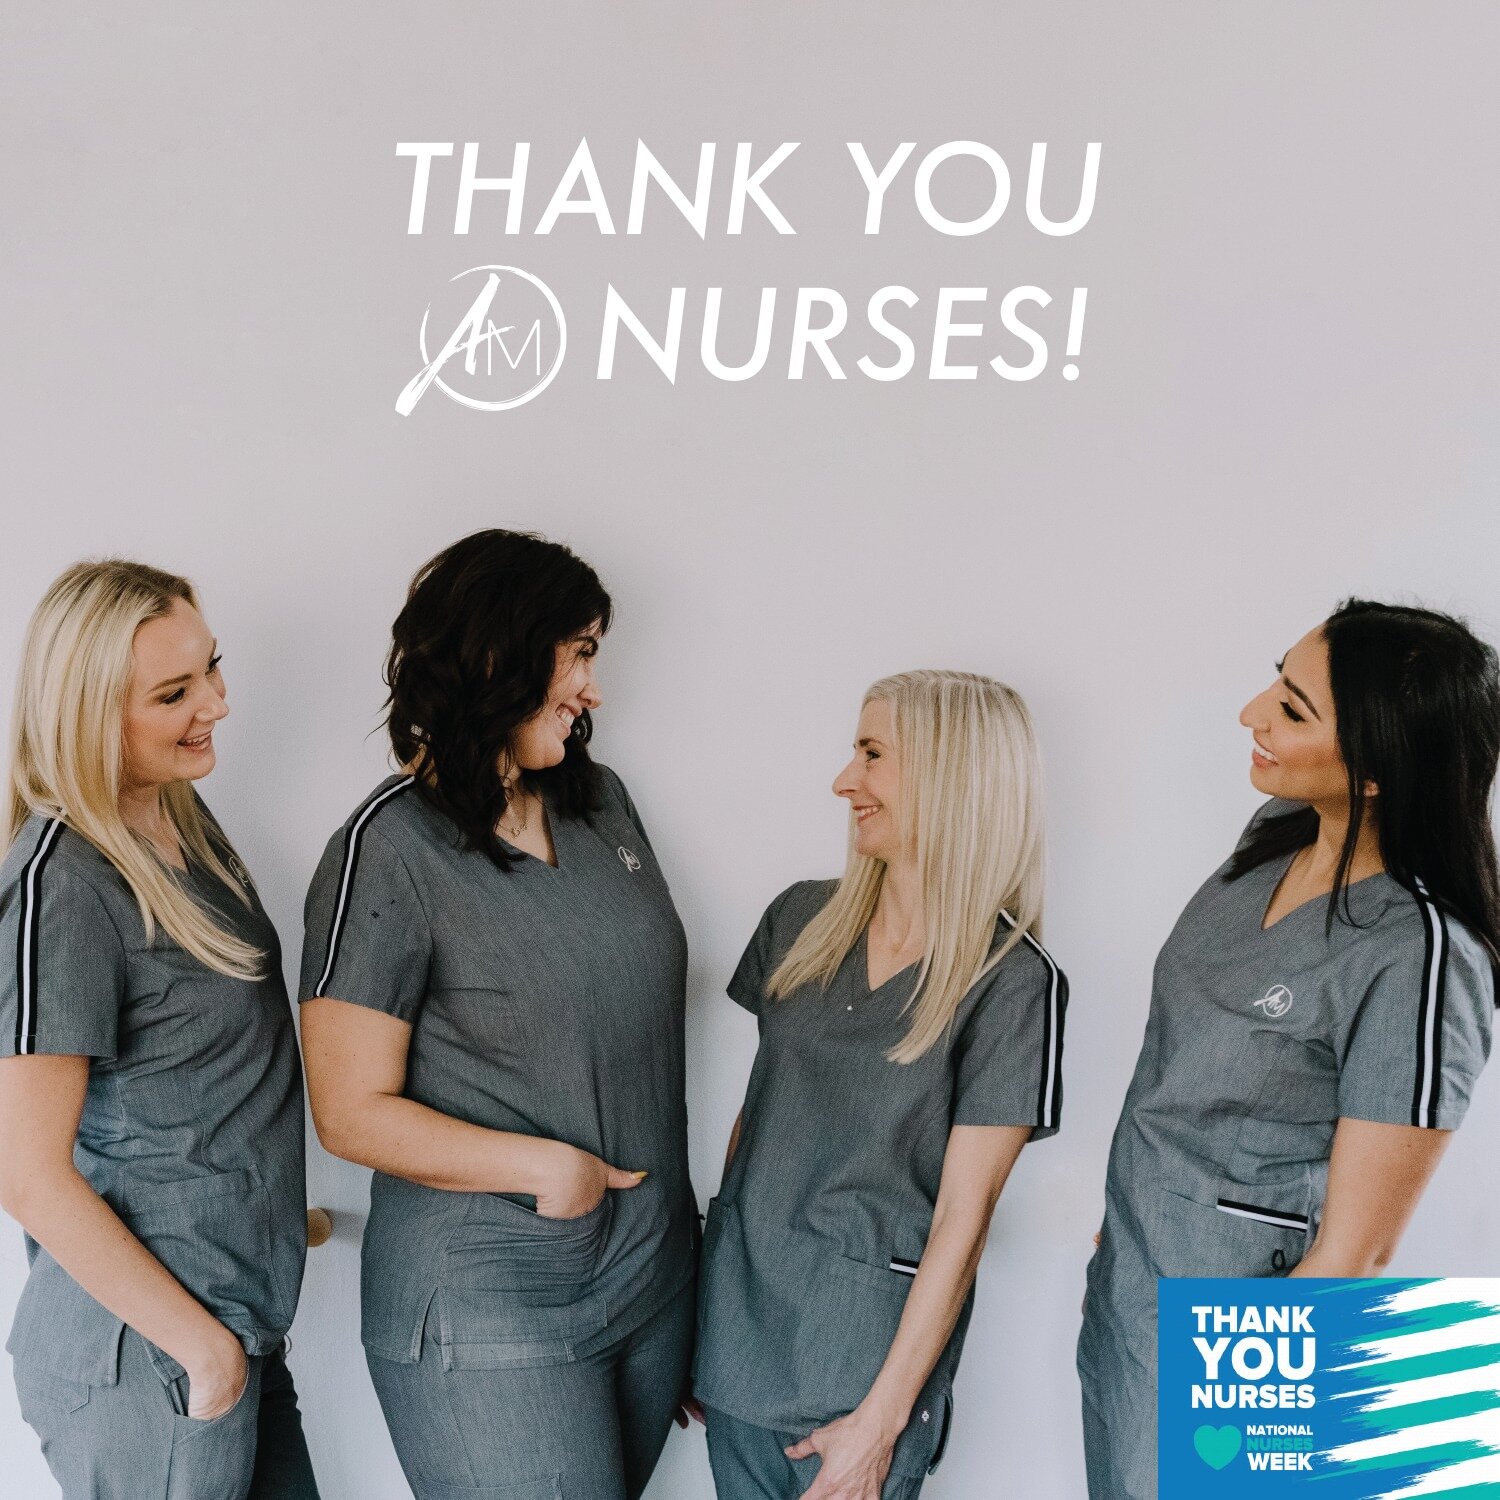 Florence Nightingale is considered the founder of modern nursing and her birthday is May 12. So, every year we celebrate Nurses Week in Ontario during the week of May 12th. Nurses are the bedrock of our healthcare system, and we are so grateful for t